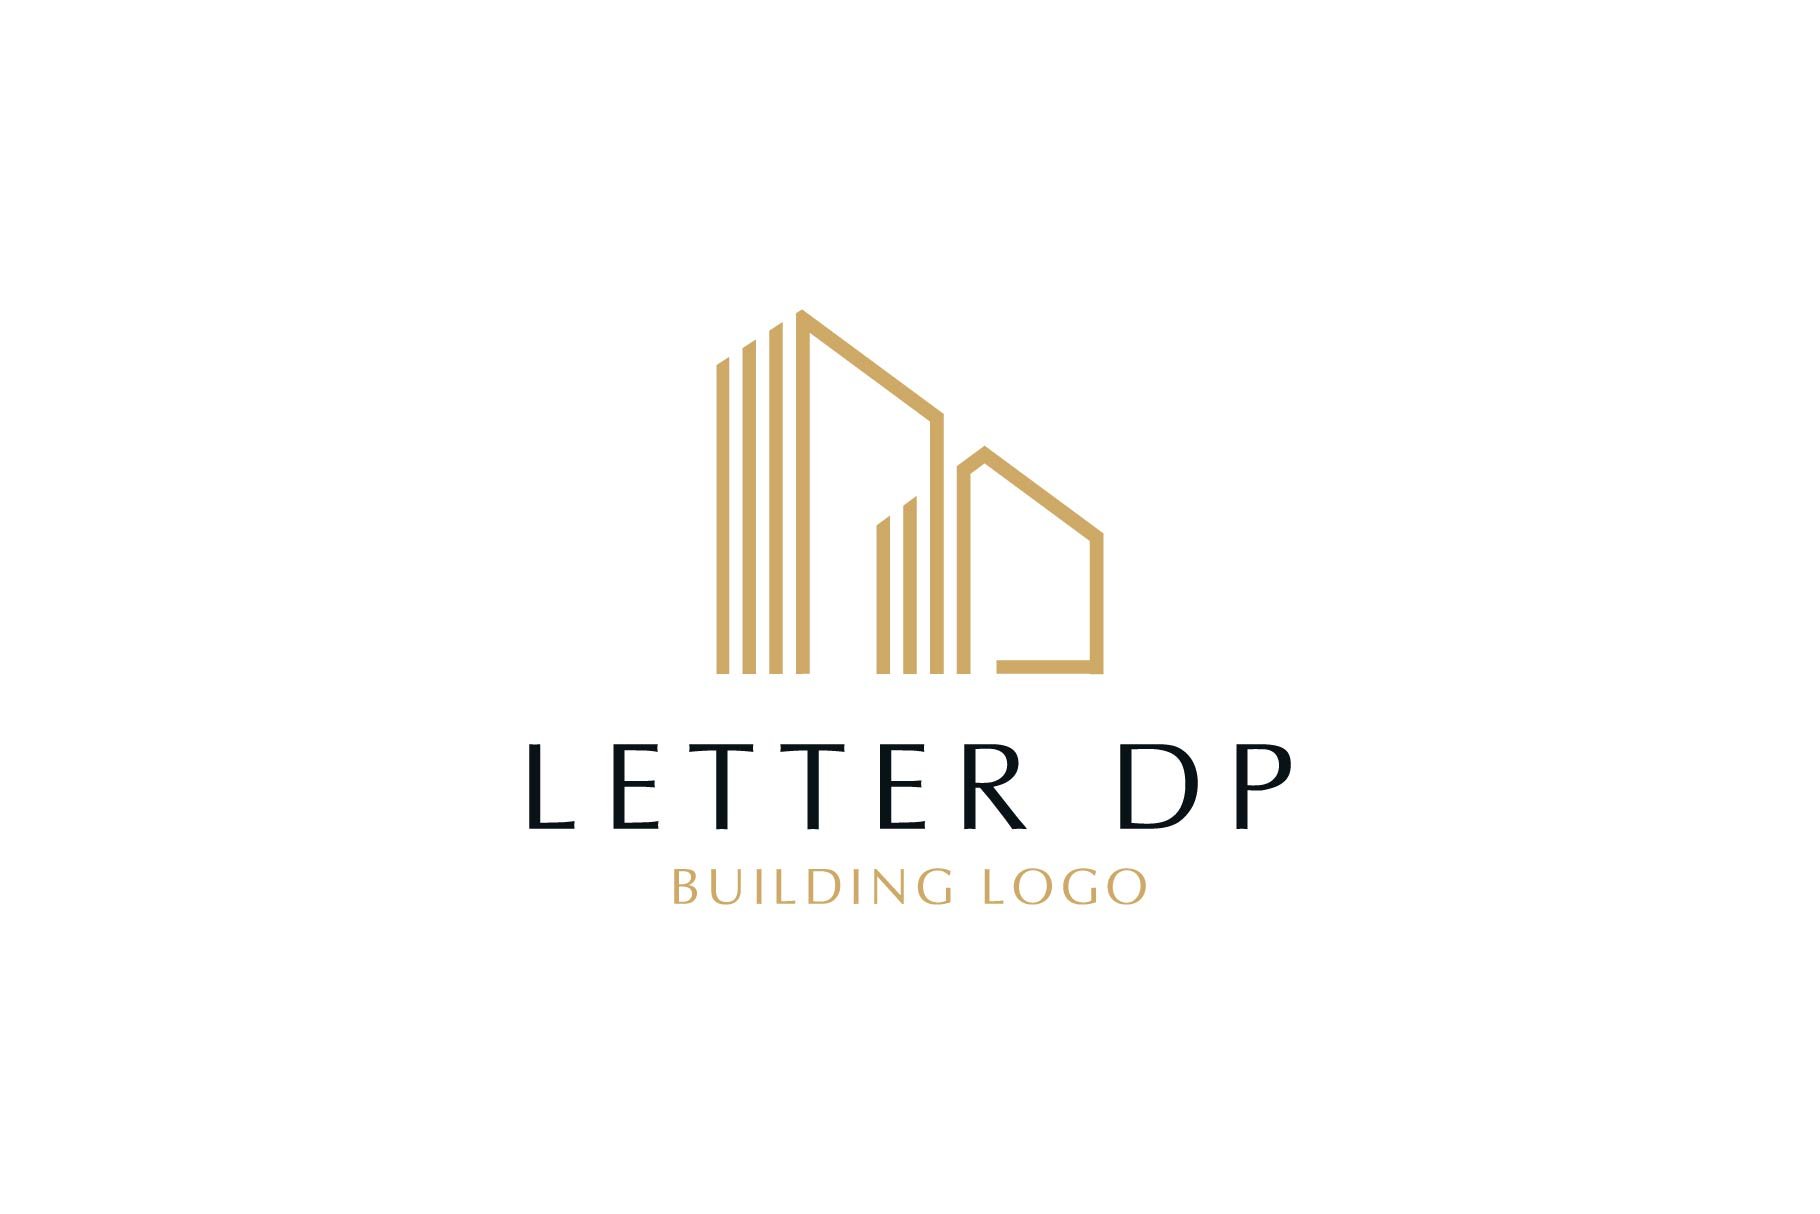 PD or DP Building Logo cover image.